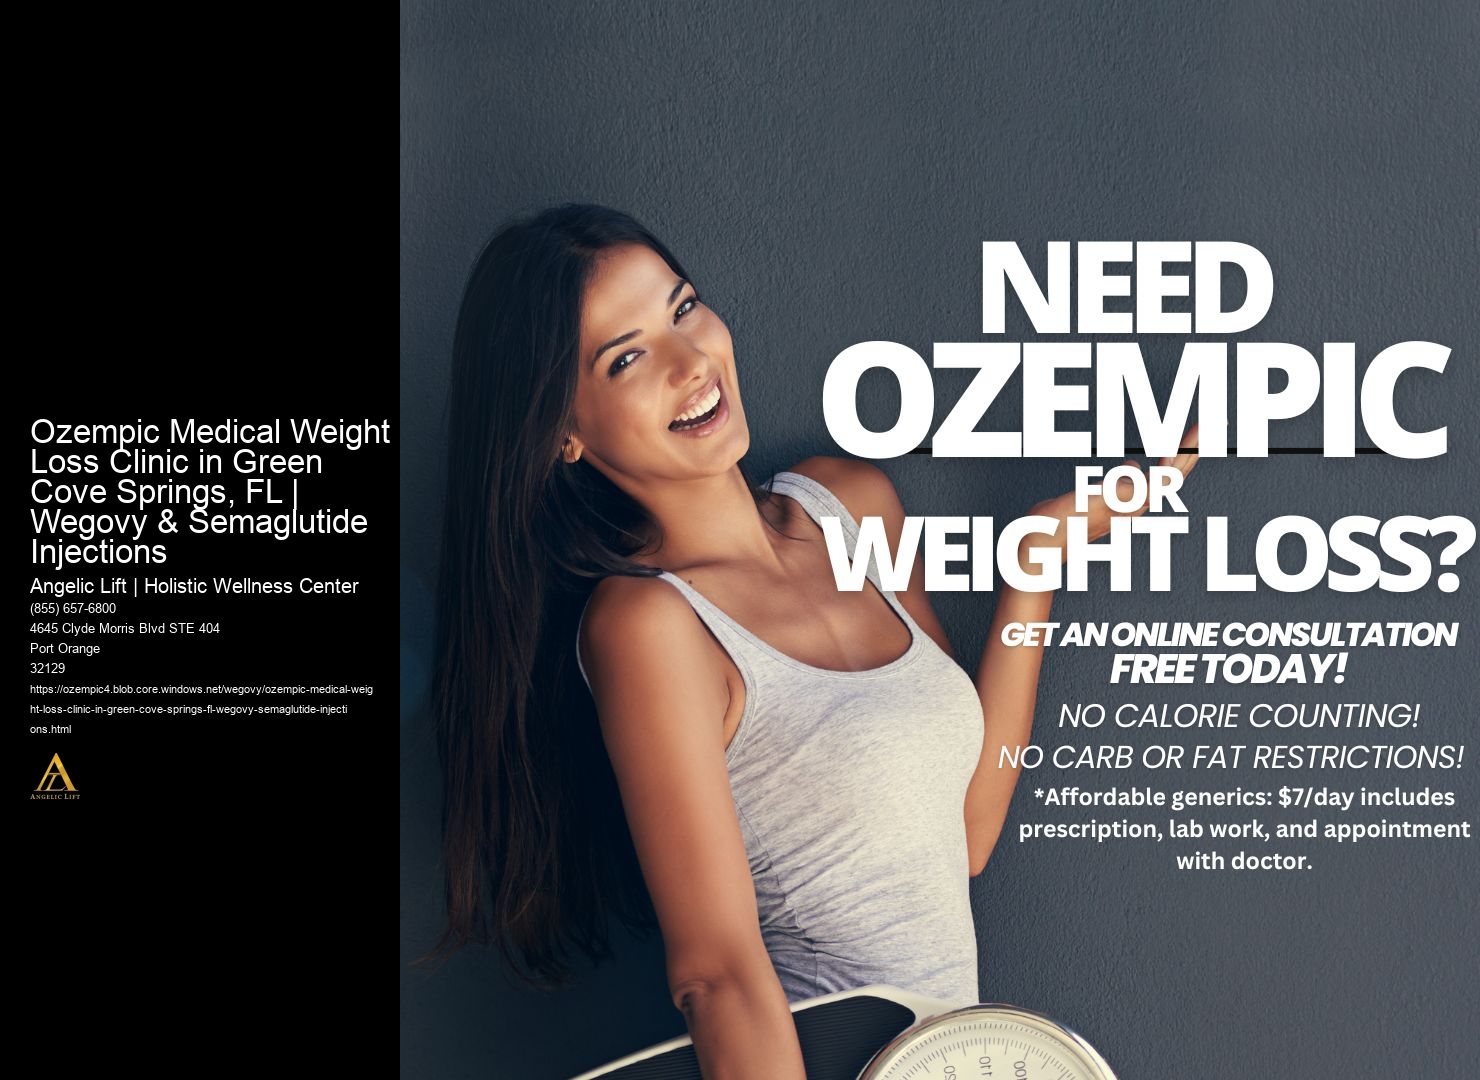 Ozempic Medical Weight Loss Clinic in Green Cove Springs, FL | Wegovy & Semaglutide Injections